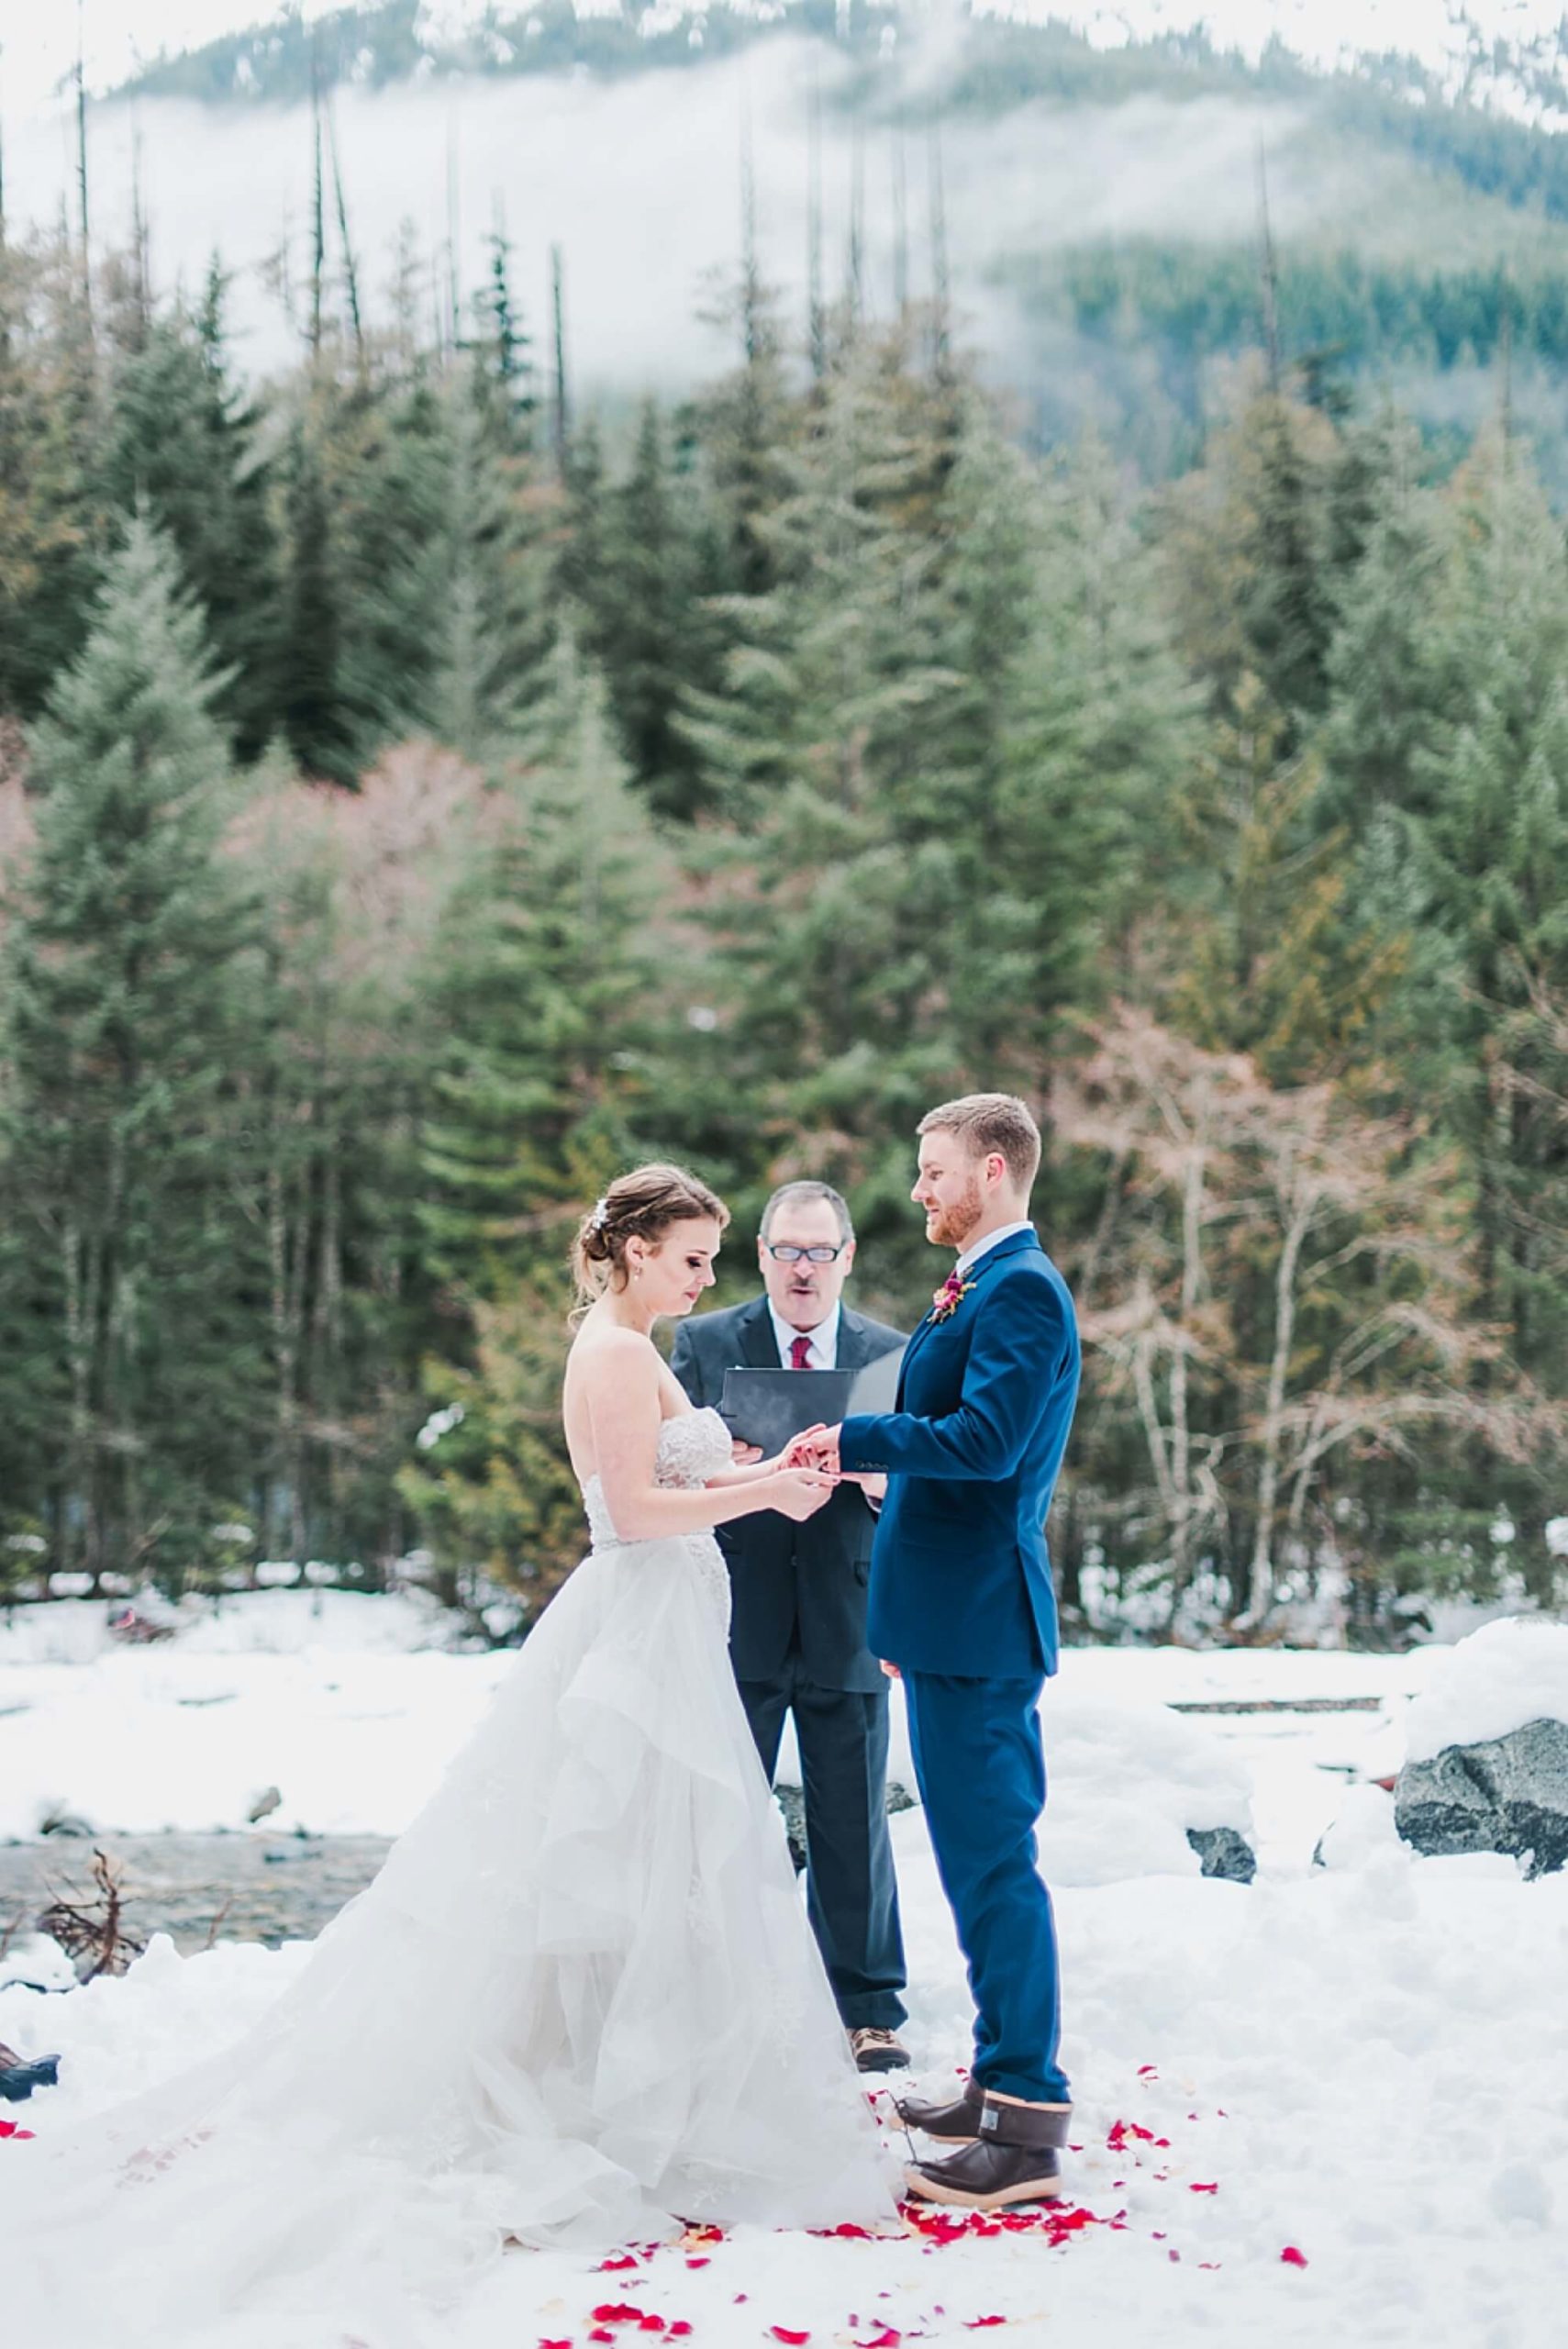 Snowy Seattle elopement at Snoqualmie Ceremony